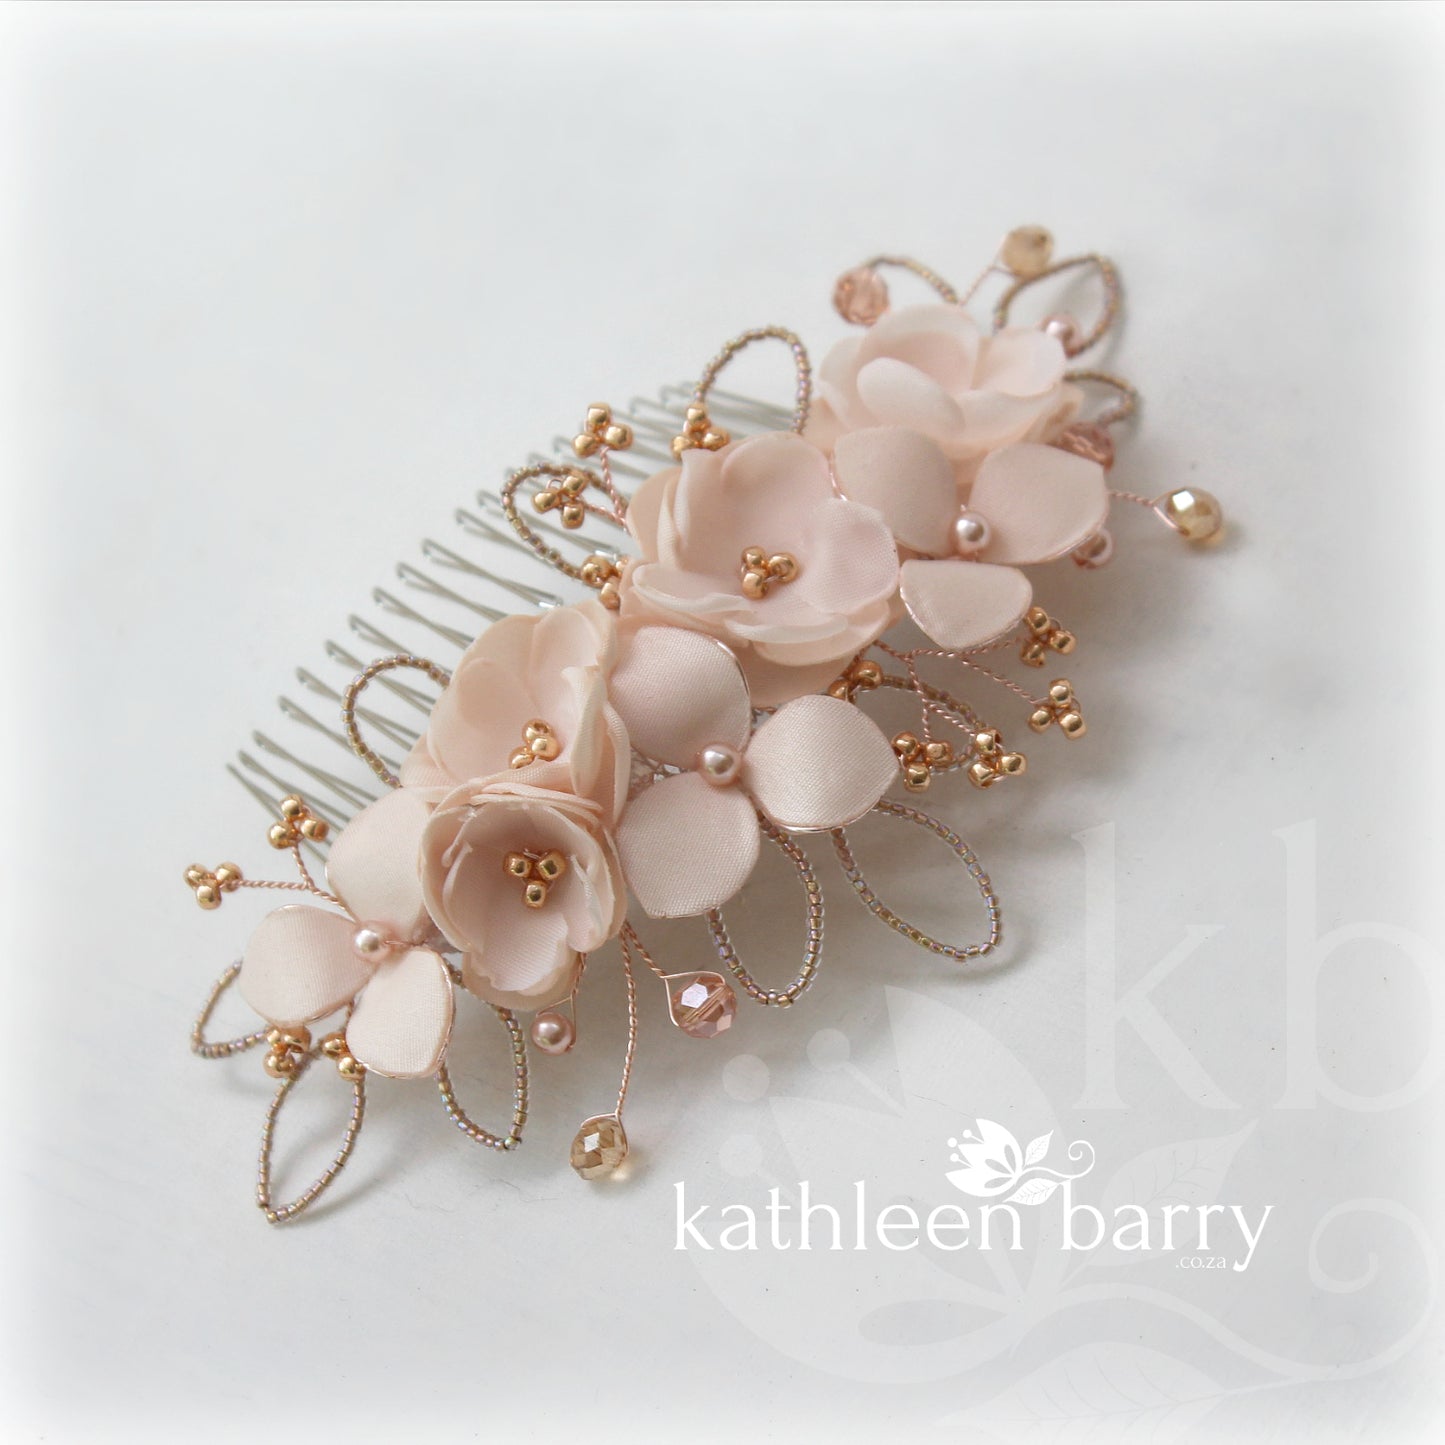 Flower wedding Hair Comb hairpiece  - veil comb - Rose gold, gold or silver - flower colors oprions available